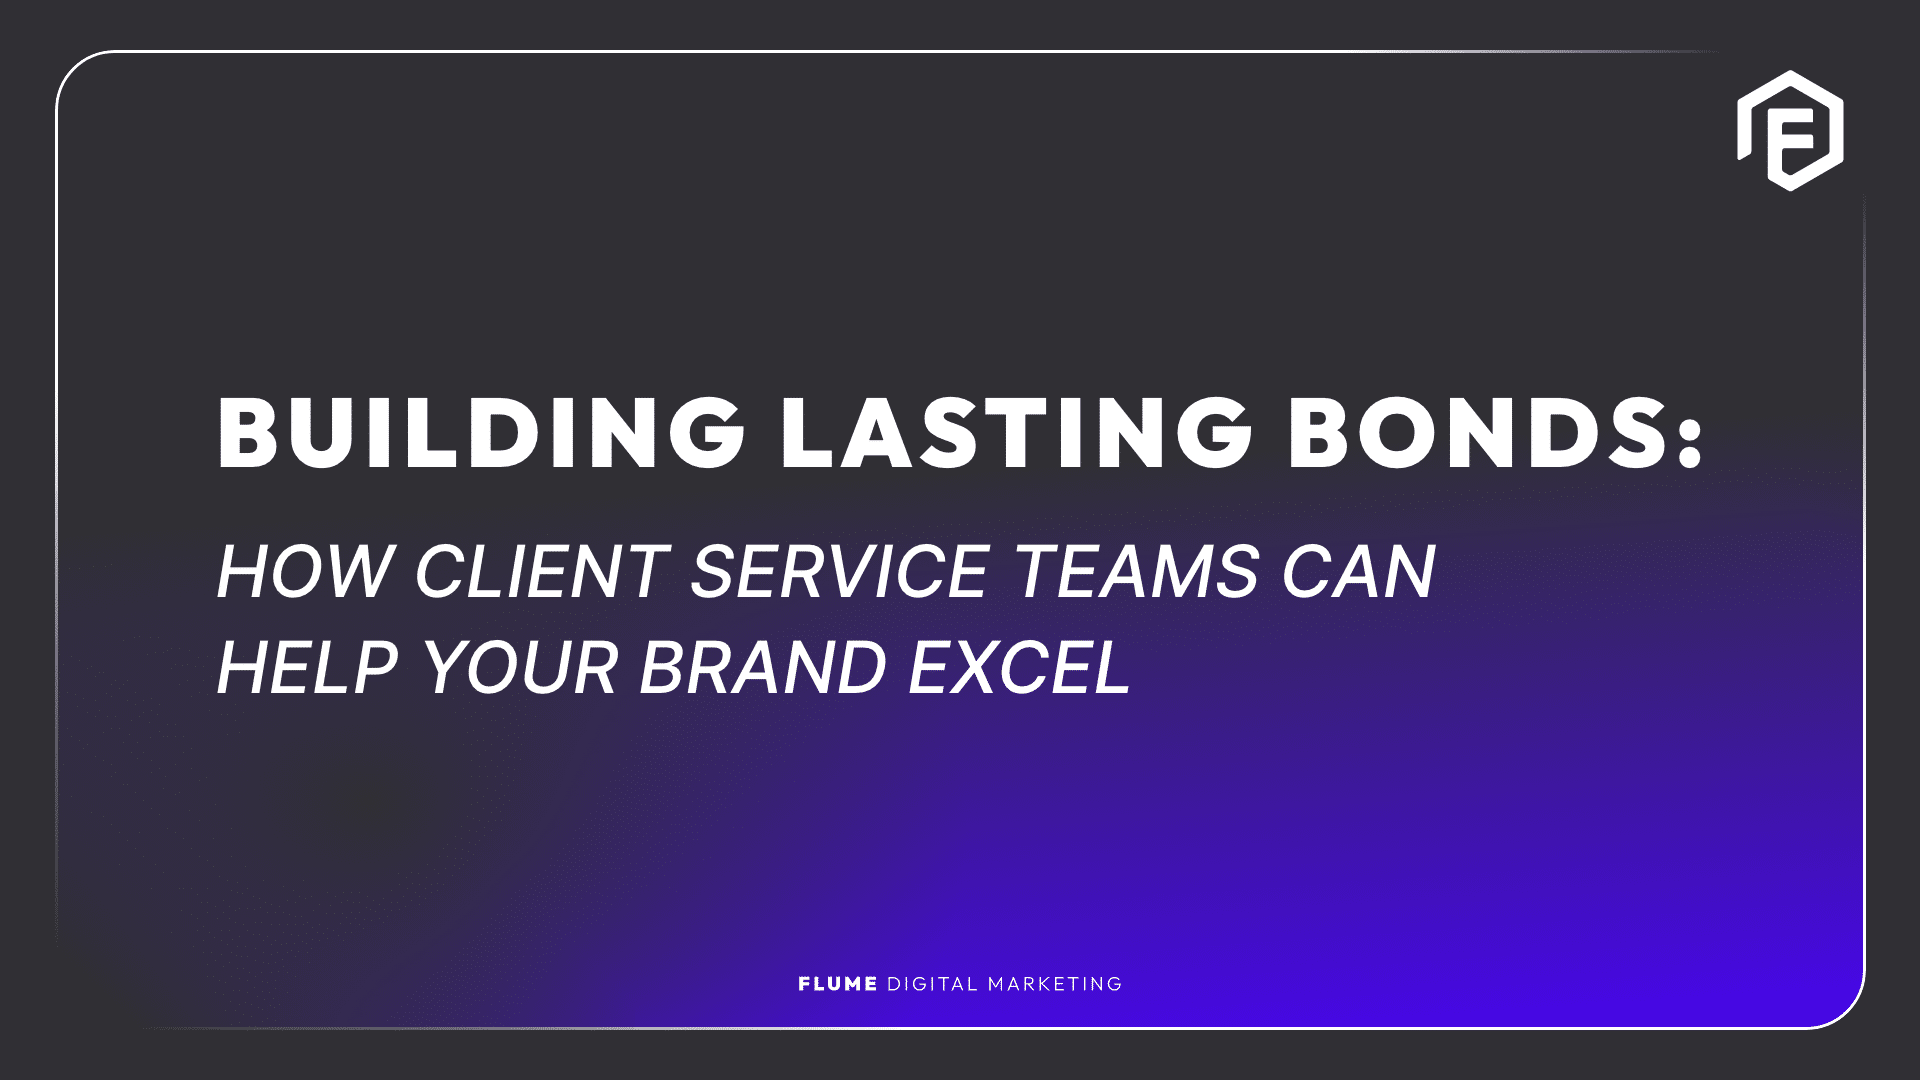 How client service teams can help your brand excel.